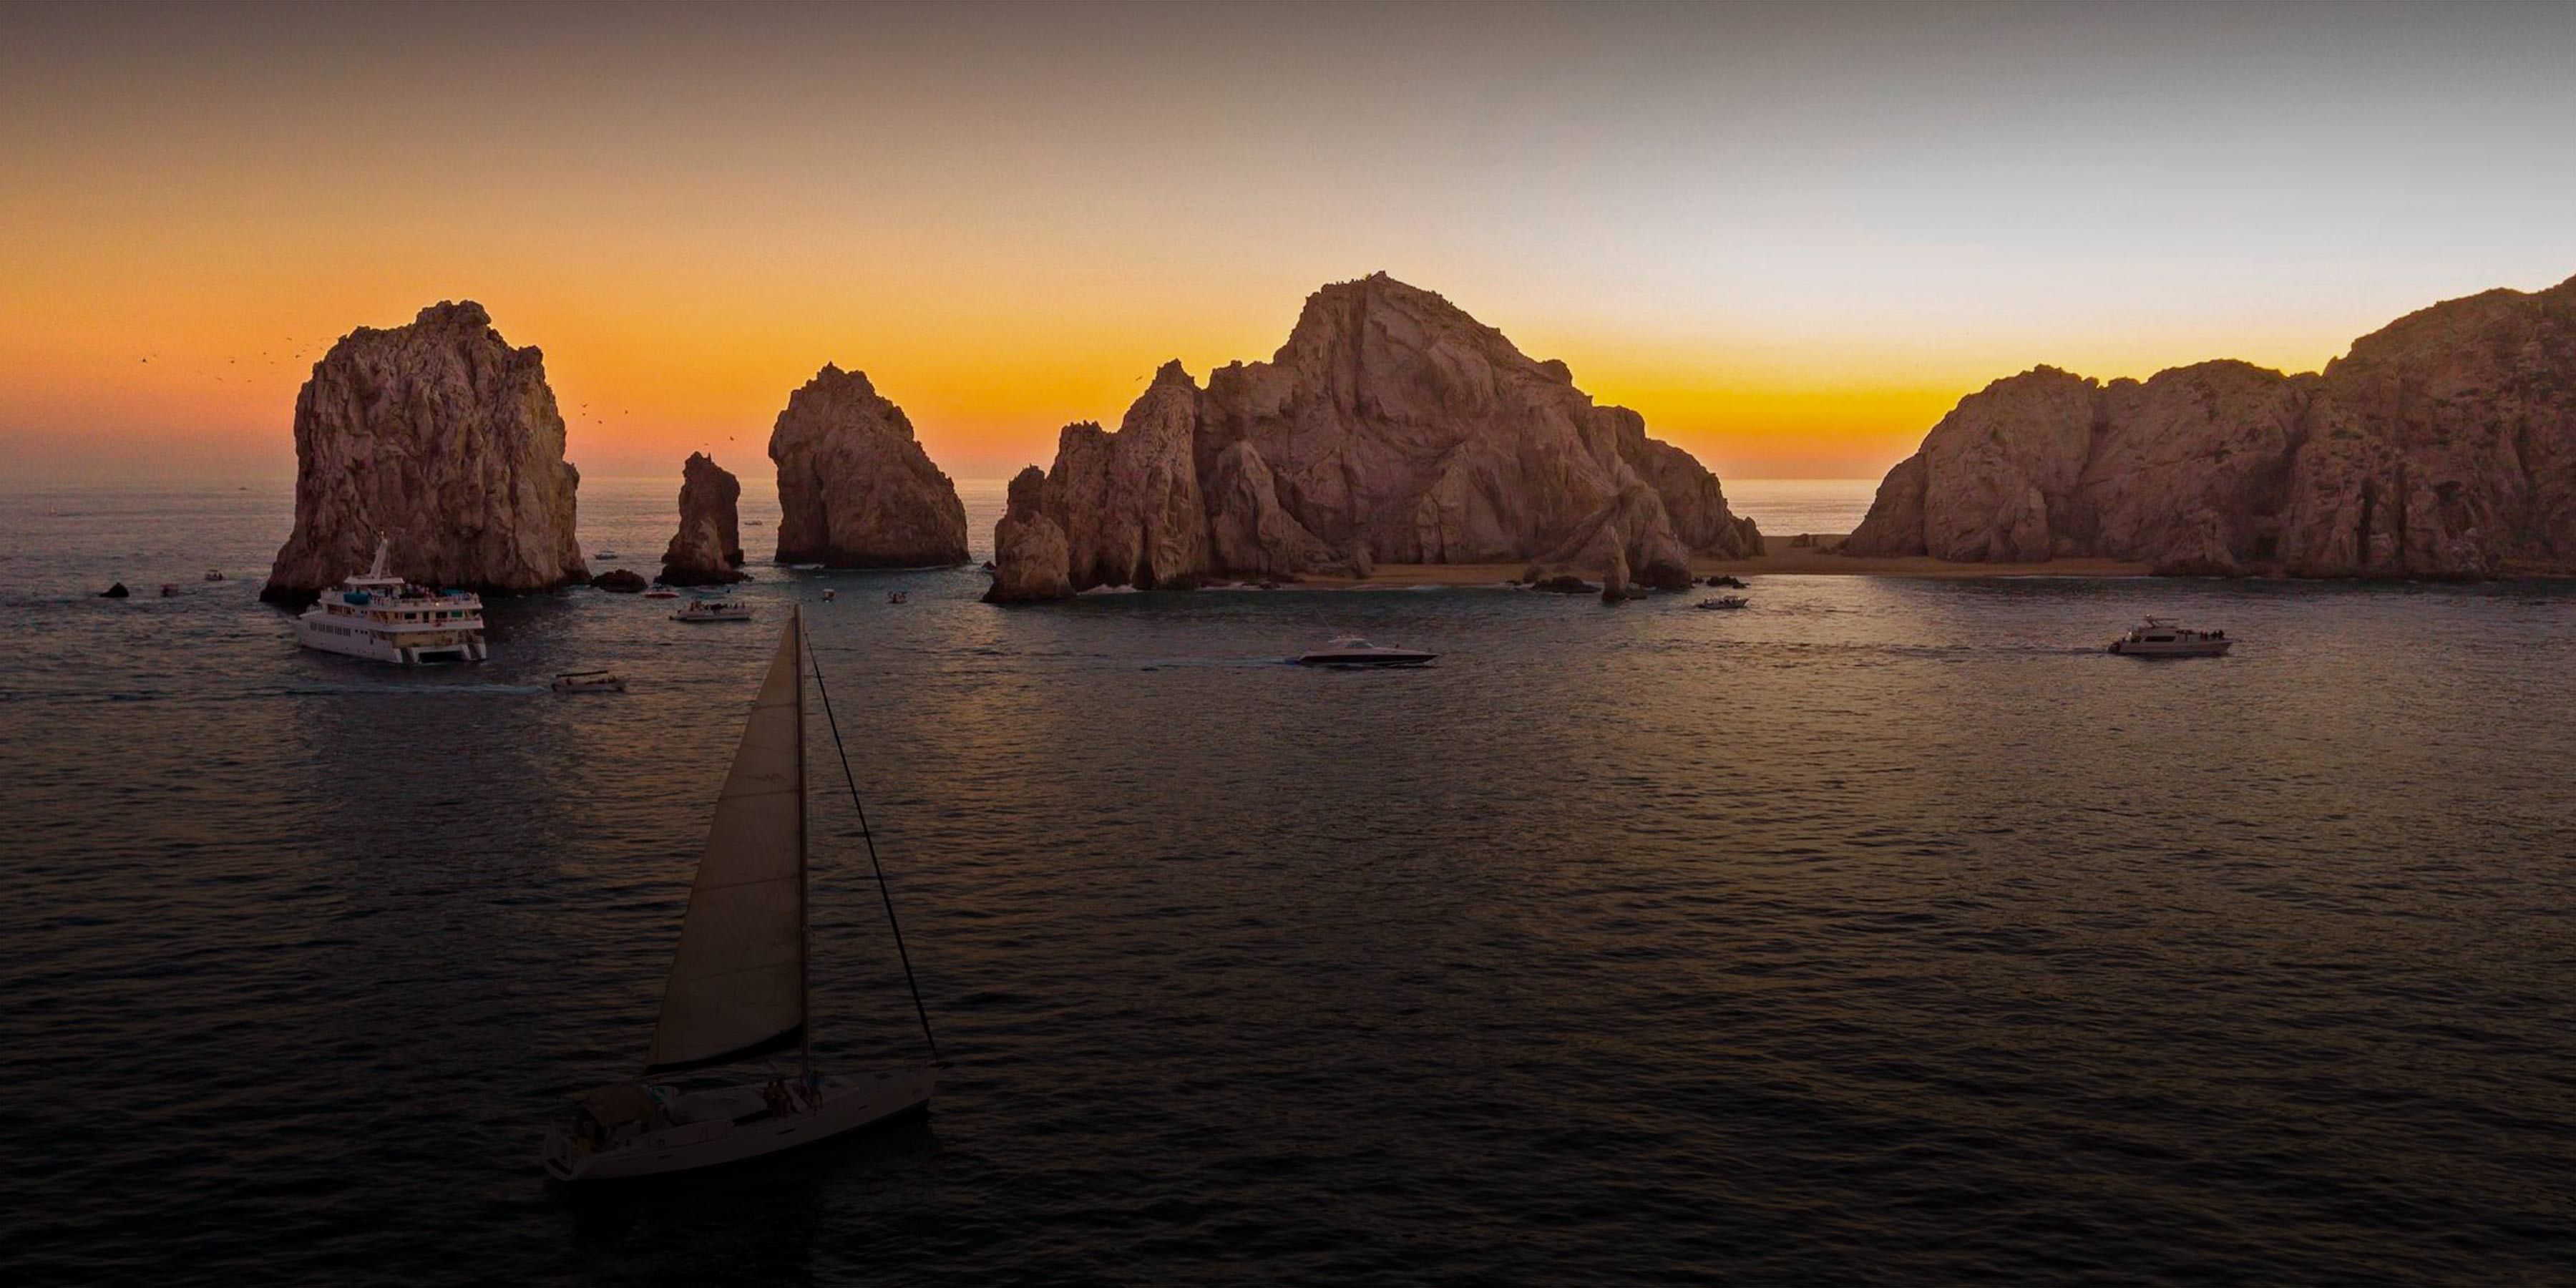 Luxury sunset sailing experience highlights